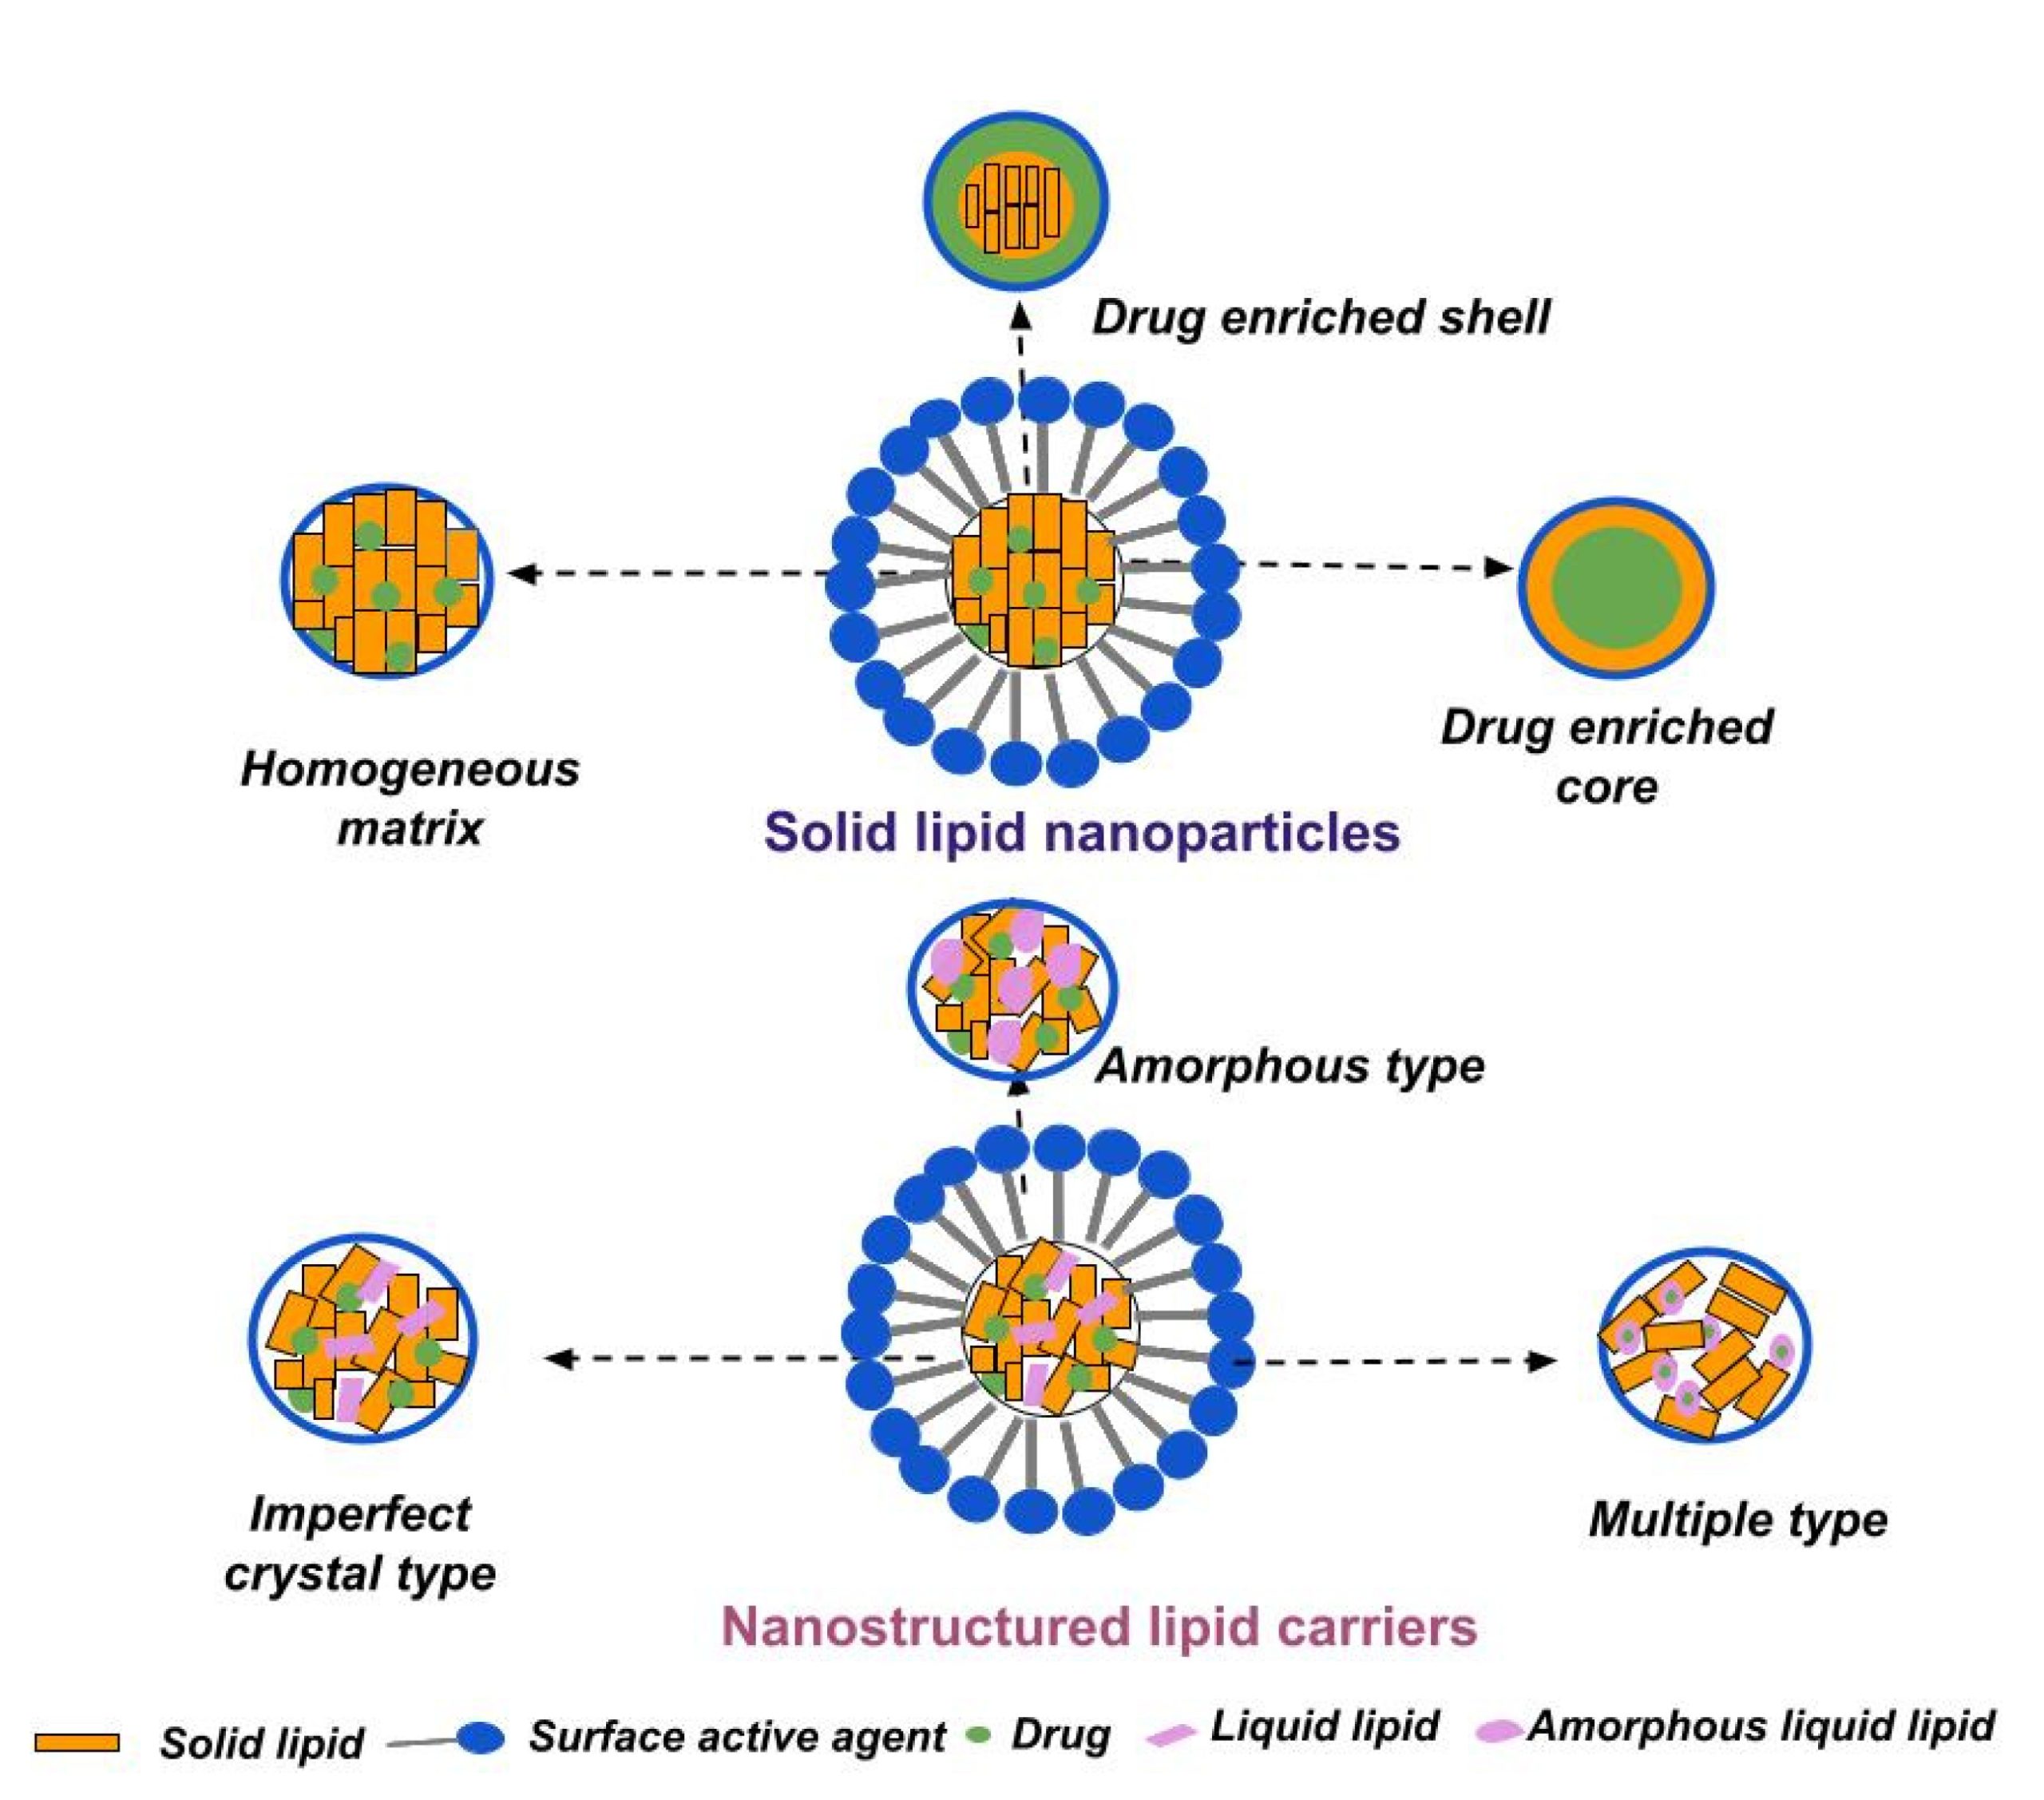 Recent Progress of Solid Lipid Nanoparticles and Nanostructured Lipid Carriers as Ocular Drug Delivery Platforms